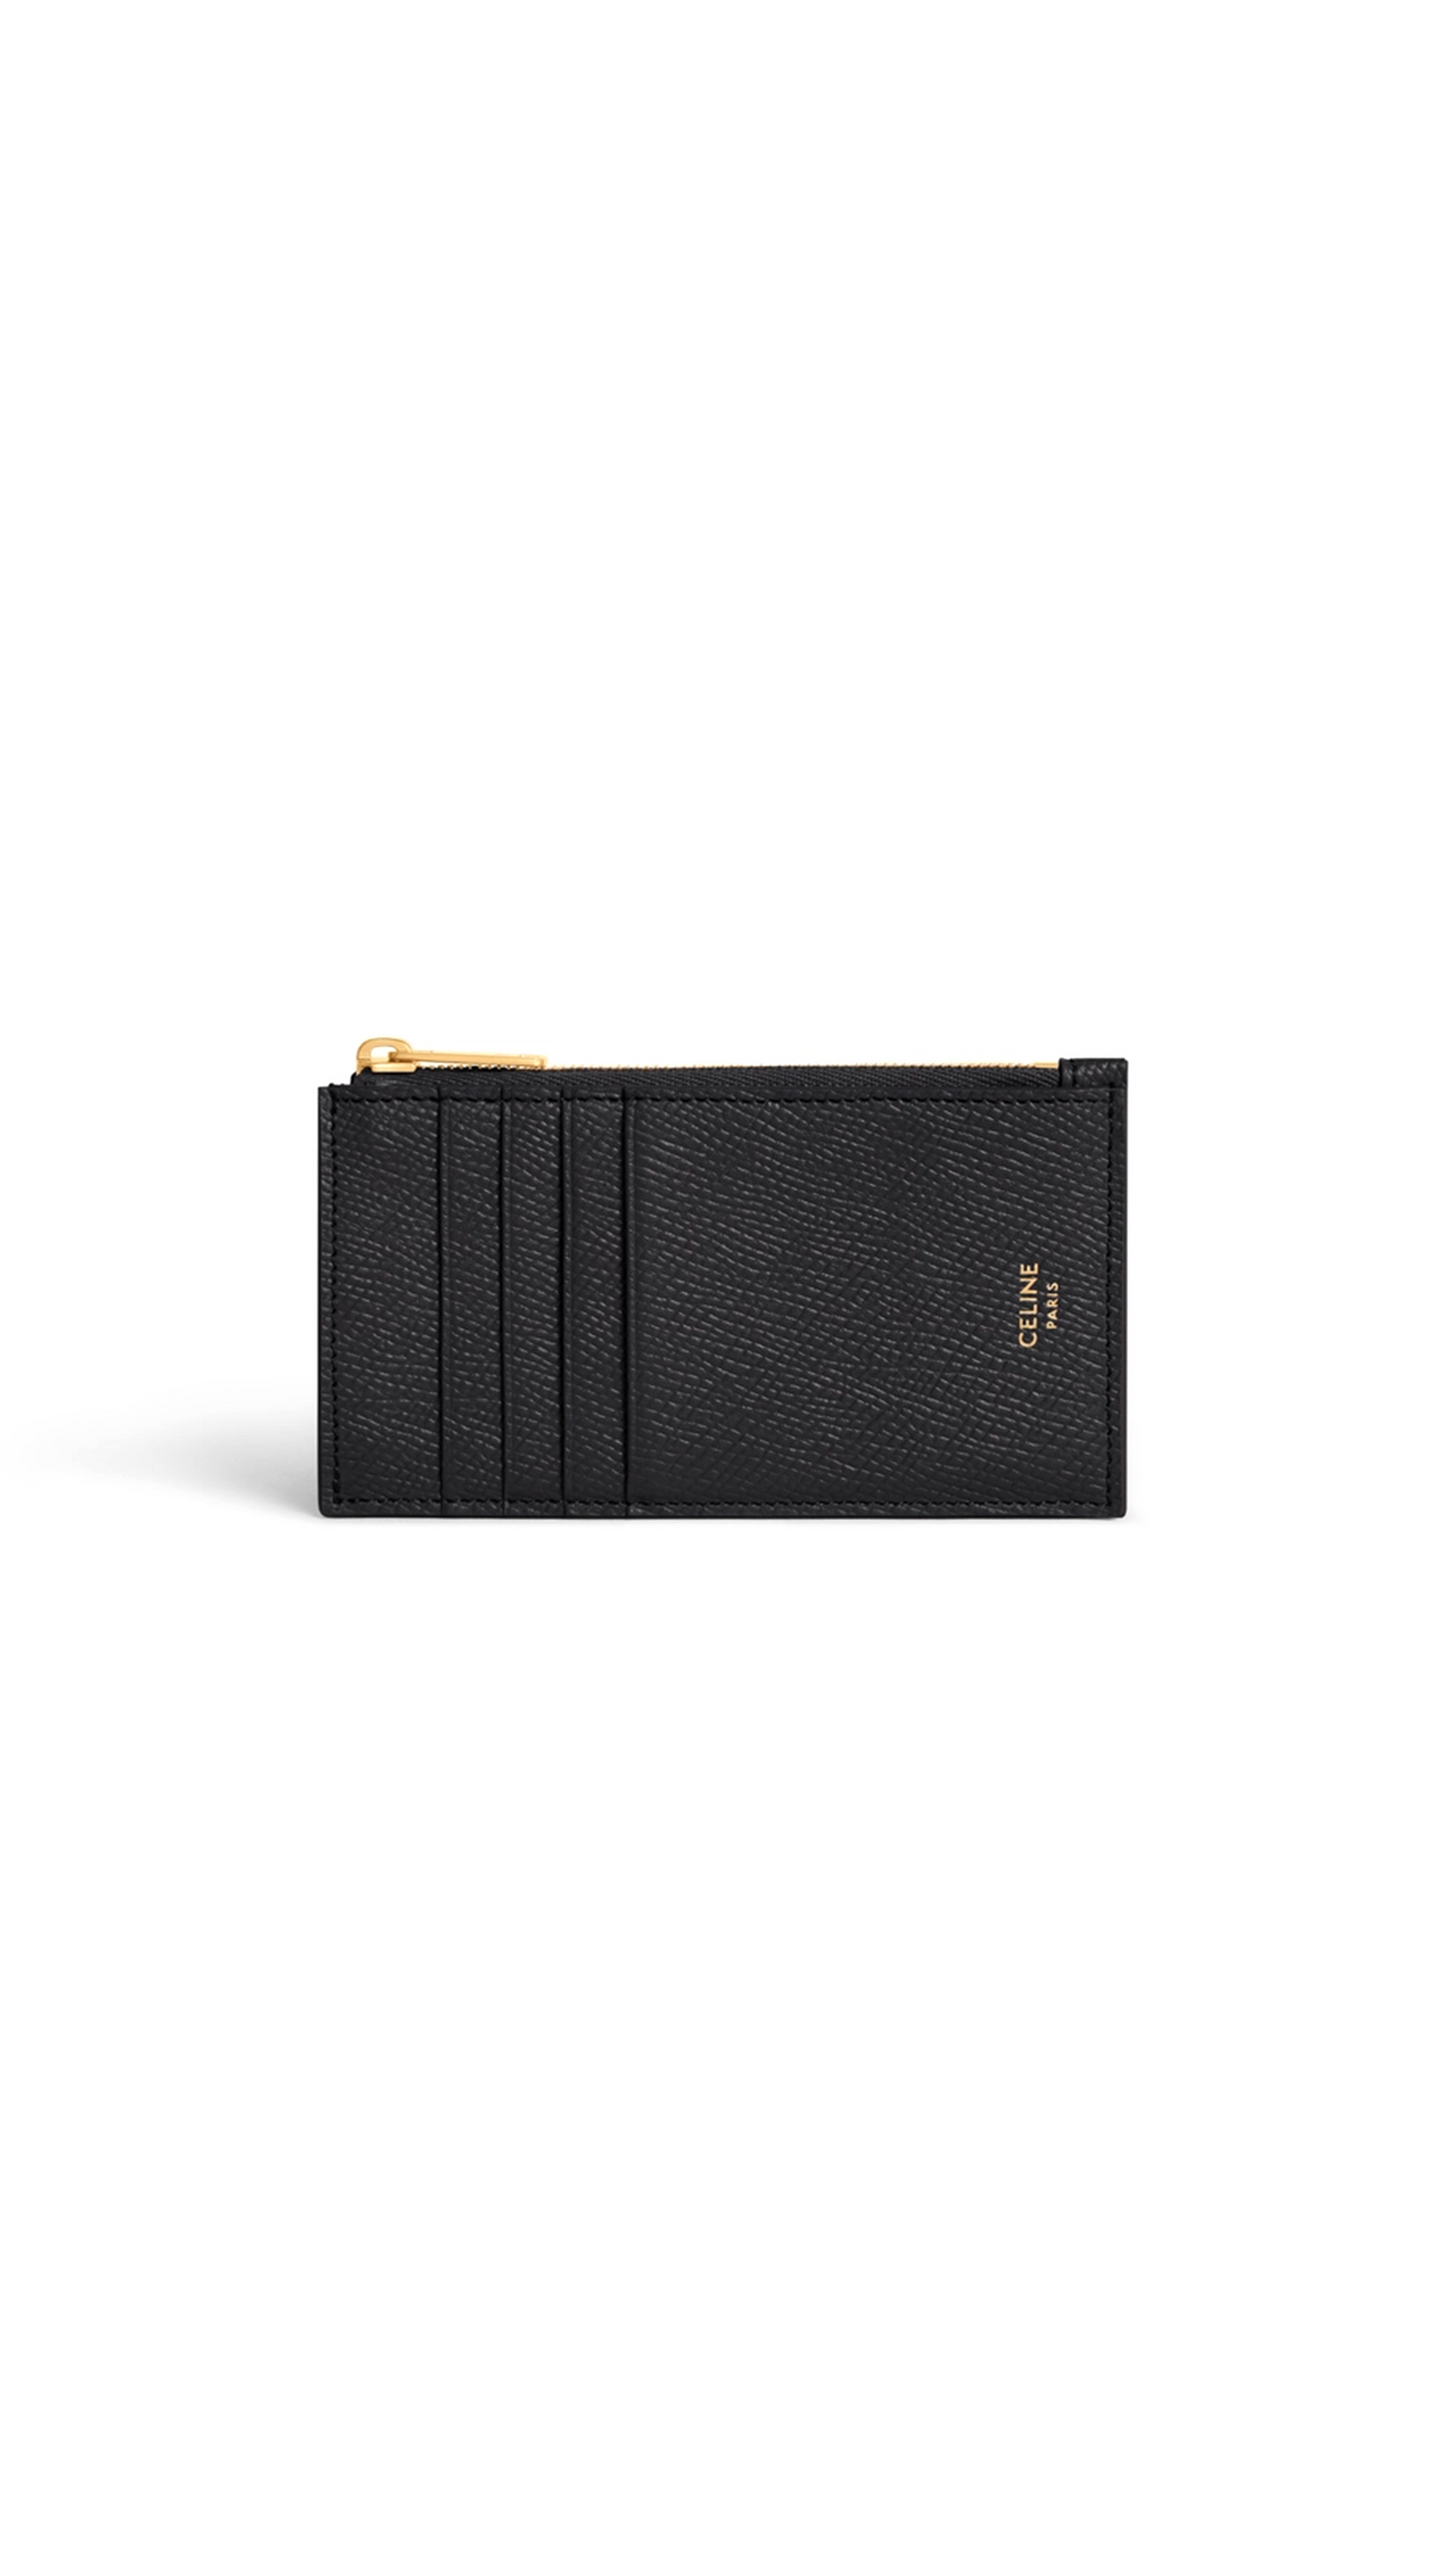 Zipped Compact Card Holder Essentials in Grained Calfskin - Black